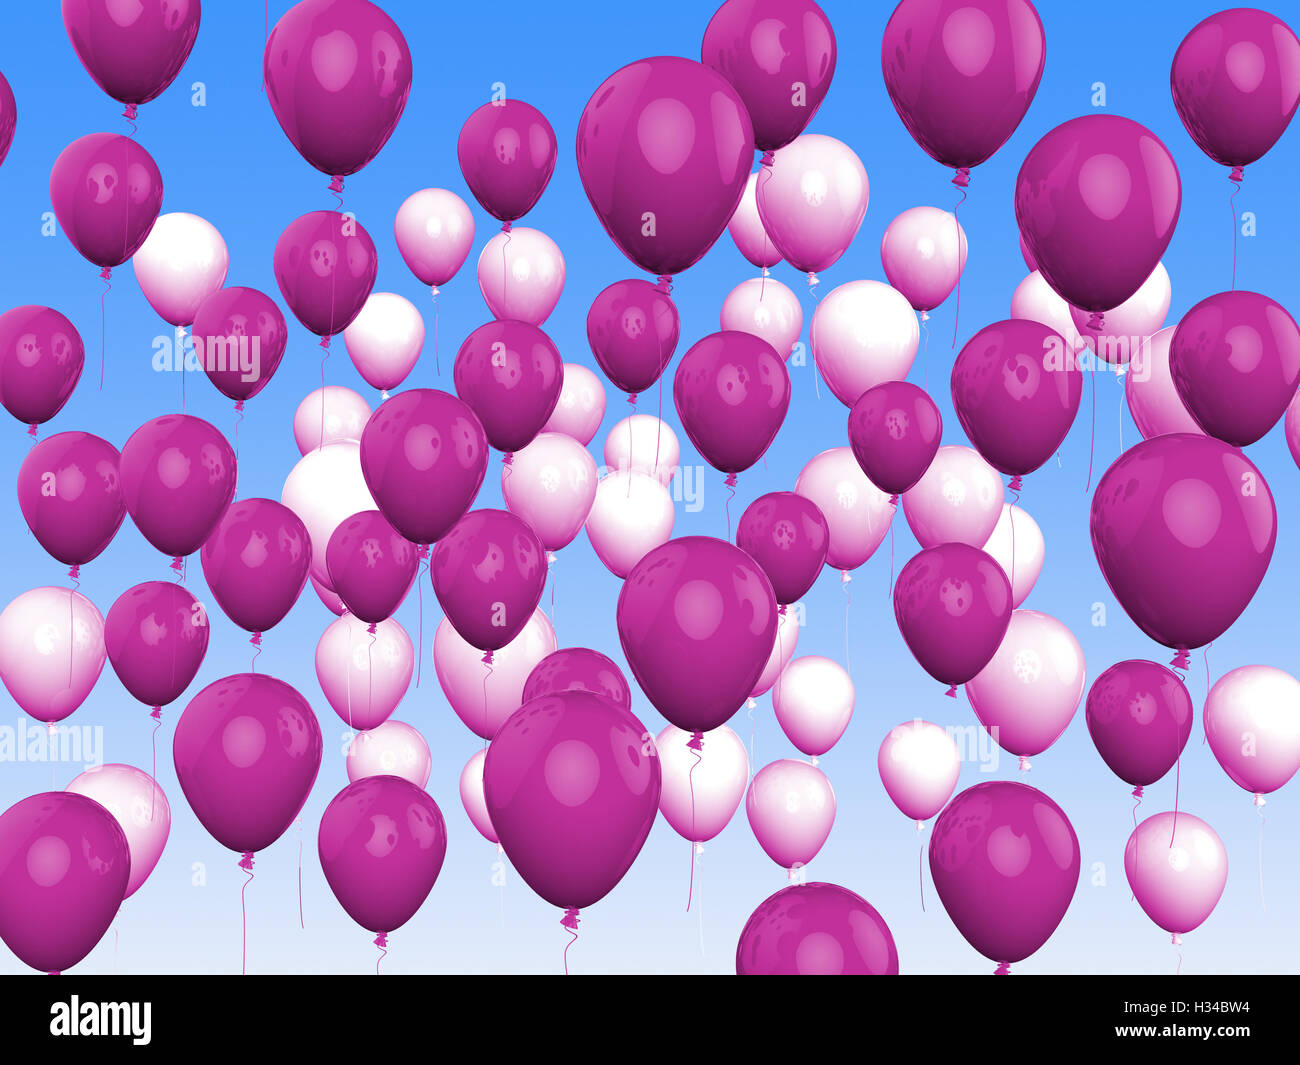 Floating Purple And White Balloons Show Girly Birthday Party Stock Photo